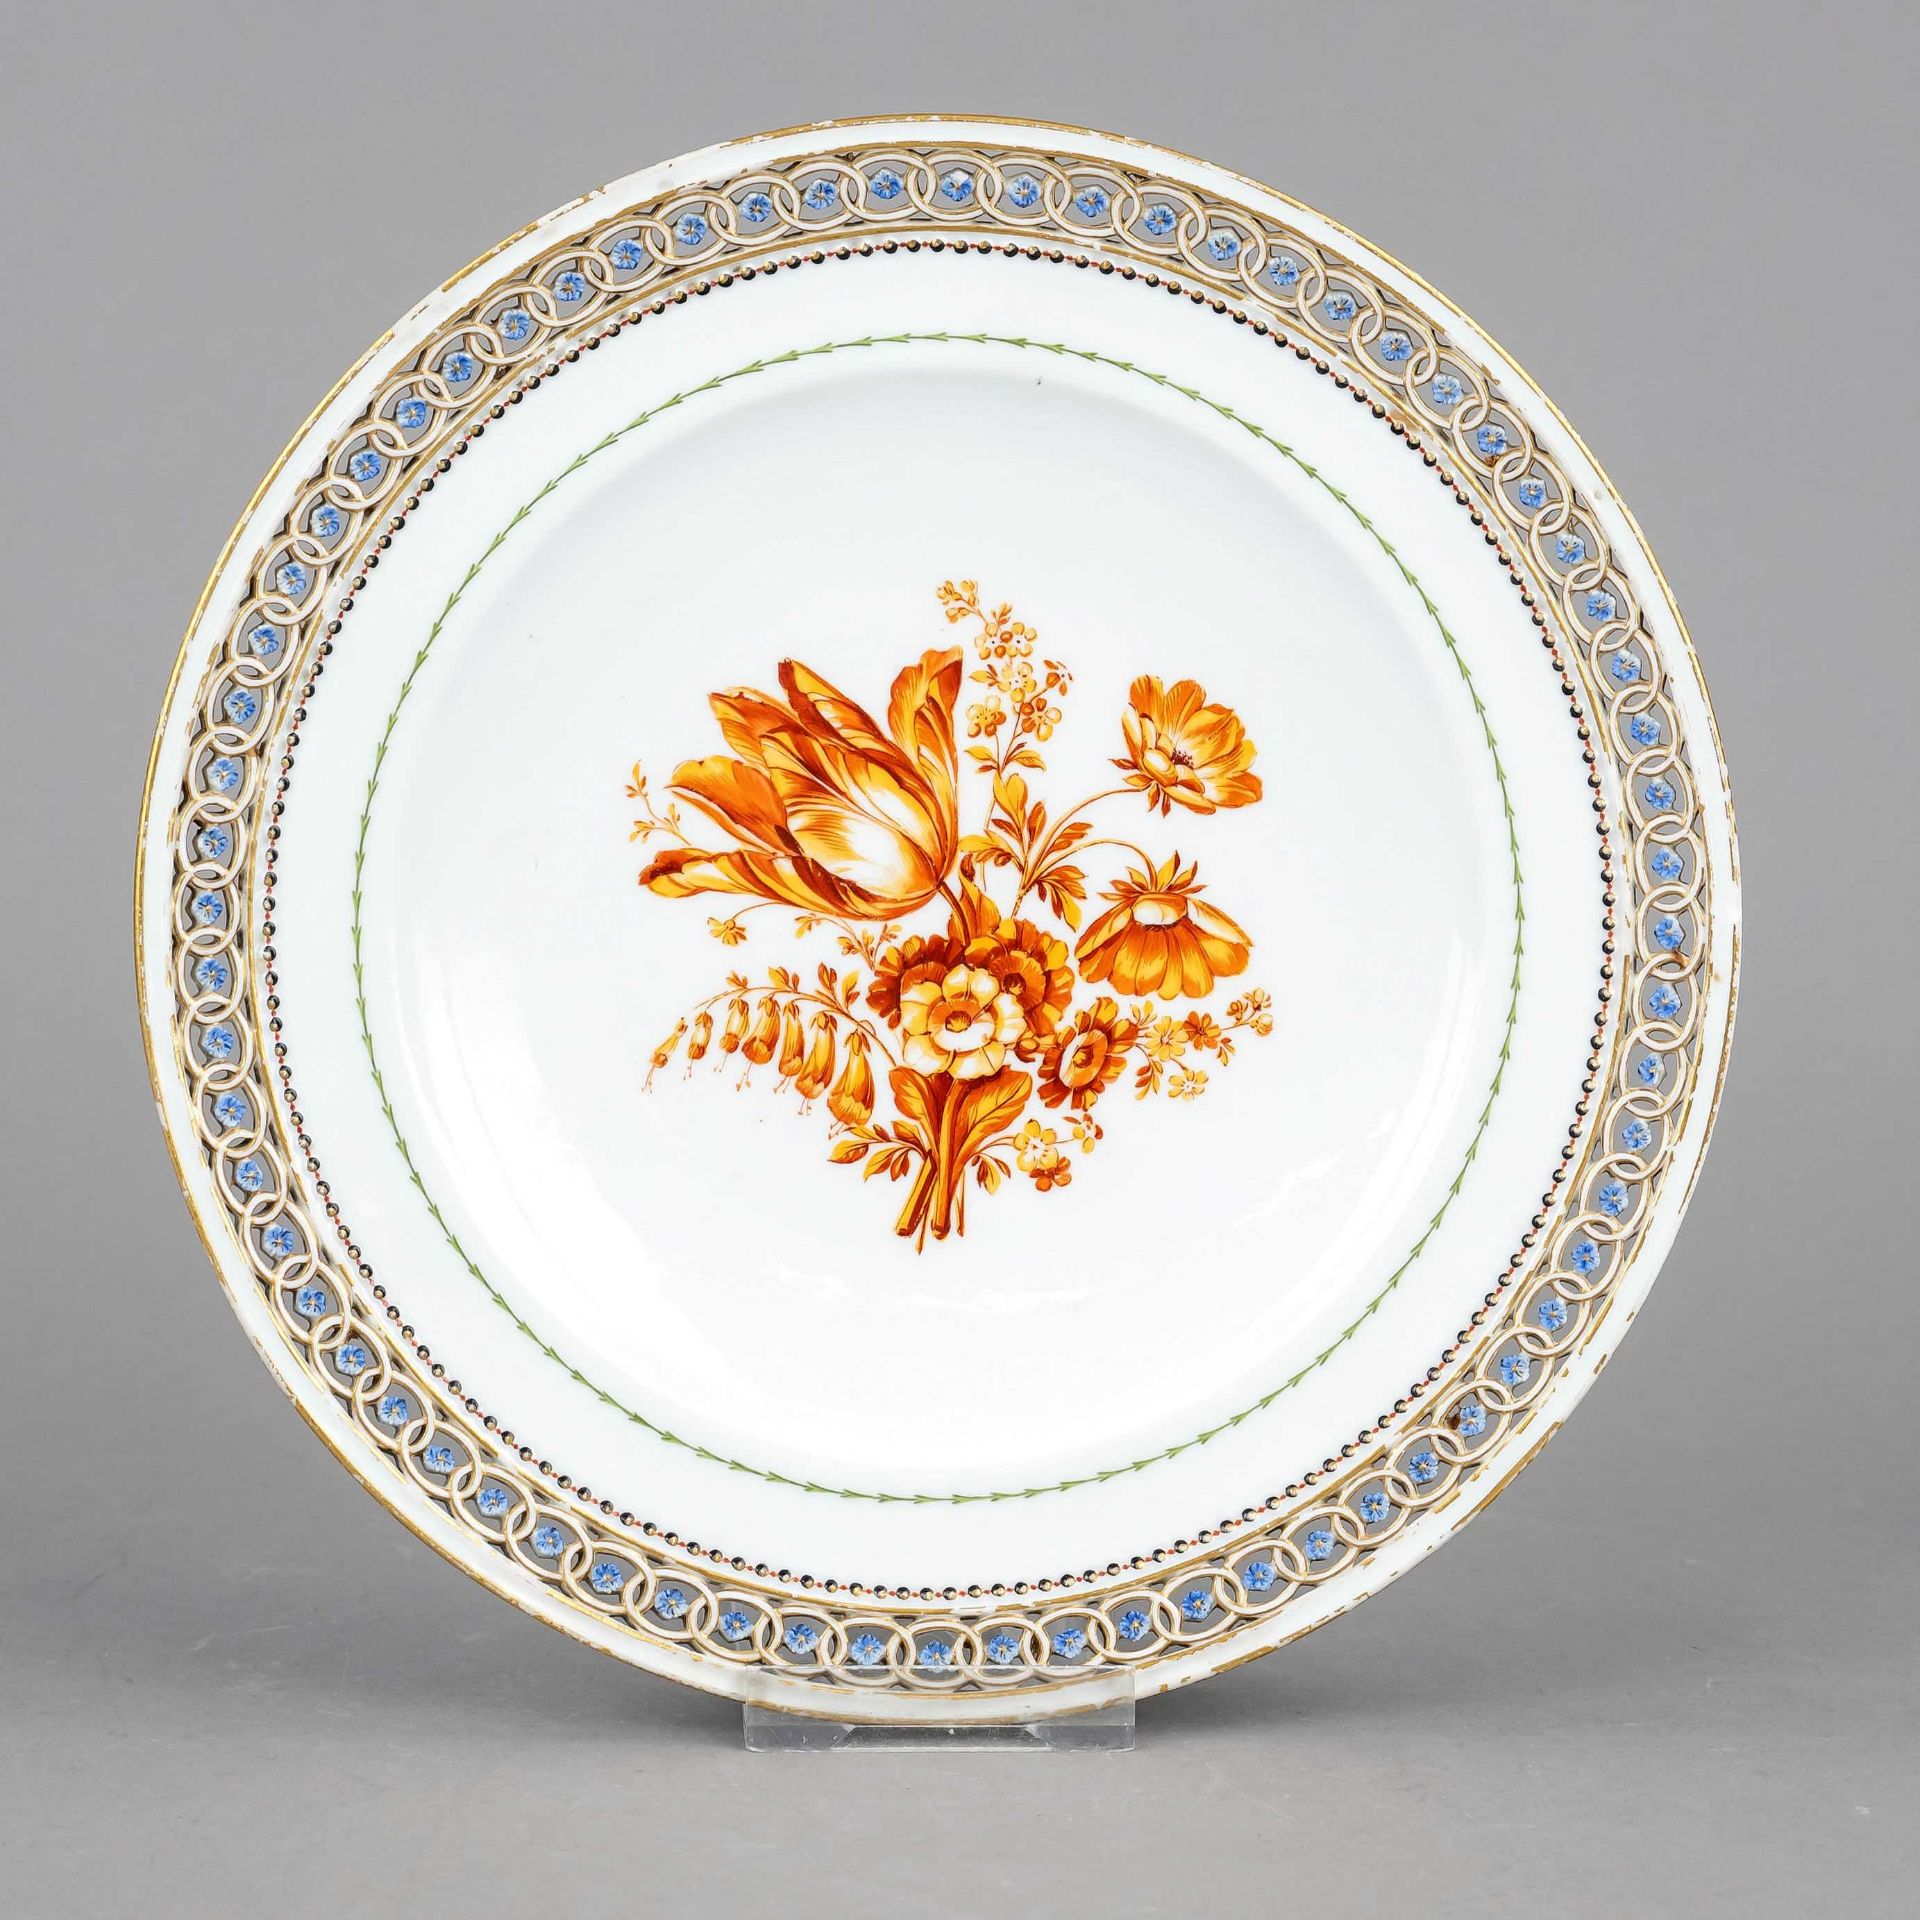 Flat plate, Meissen, Marcolini mark 1784-1817, 1st choice, in the mirror floral painting in